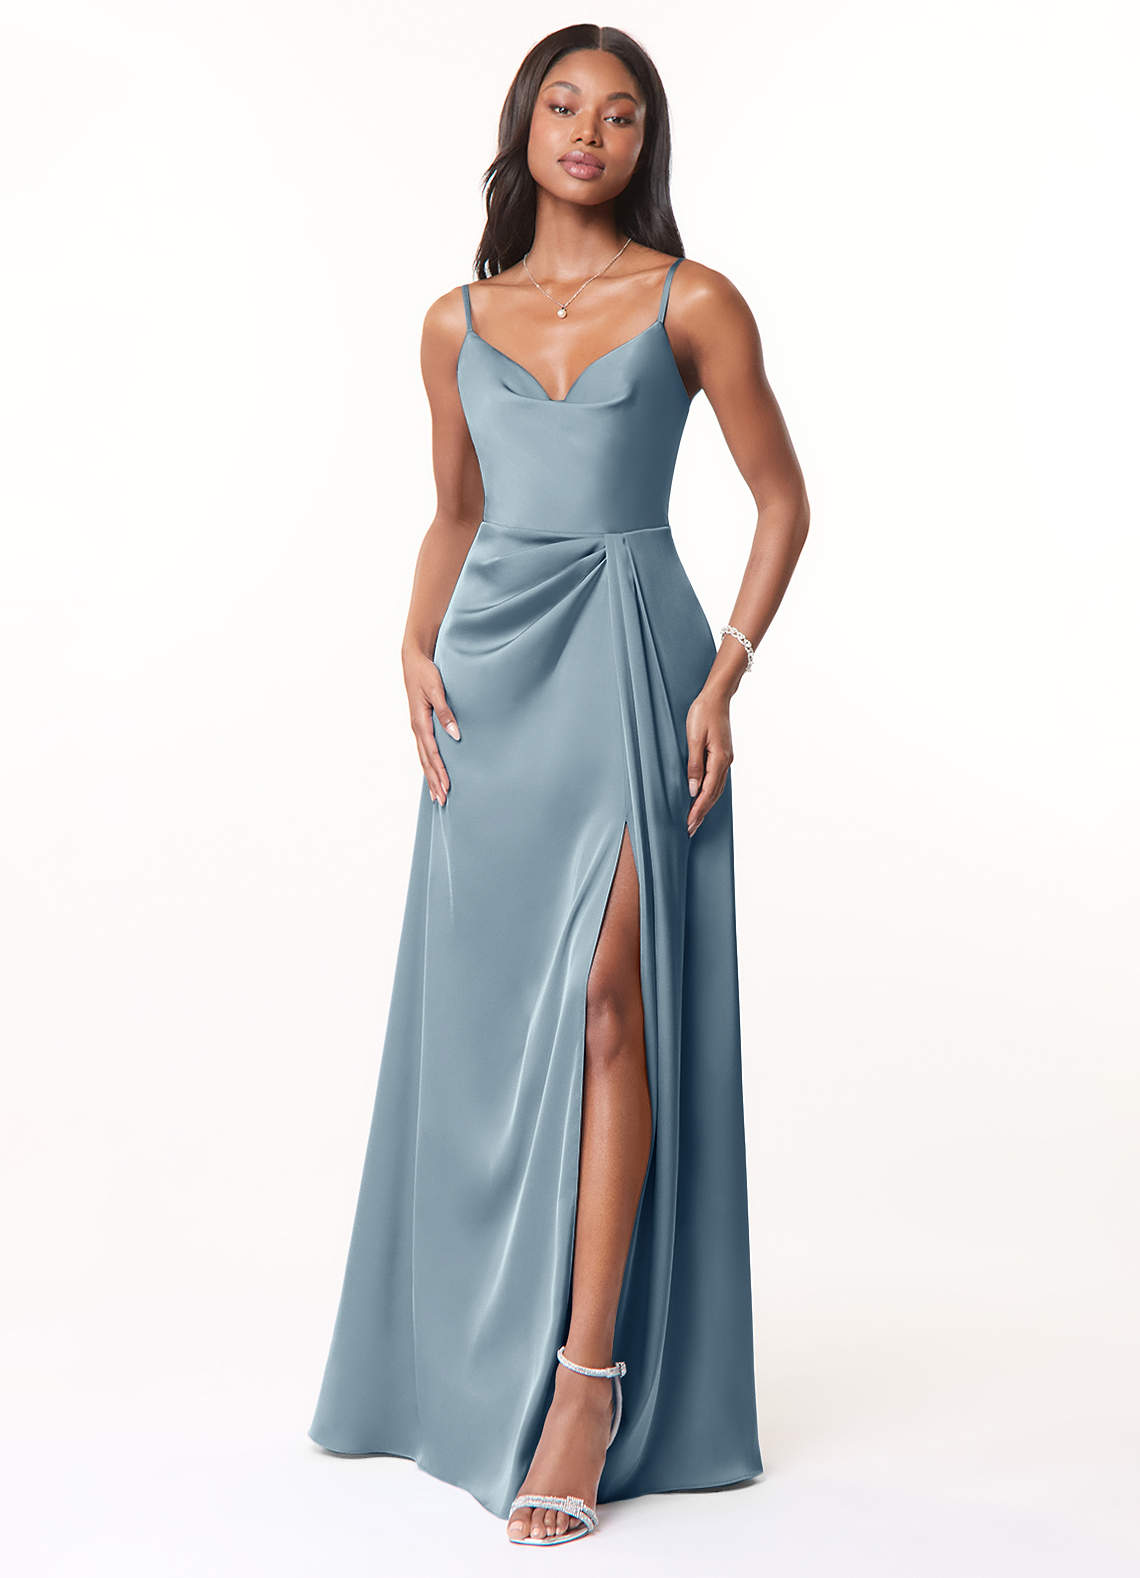 Baby Blue Satin A Line Dusty Blue Cocktail Dress With Spaghetti